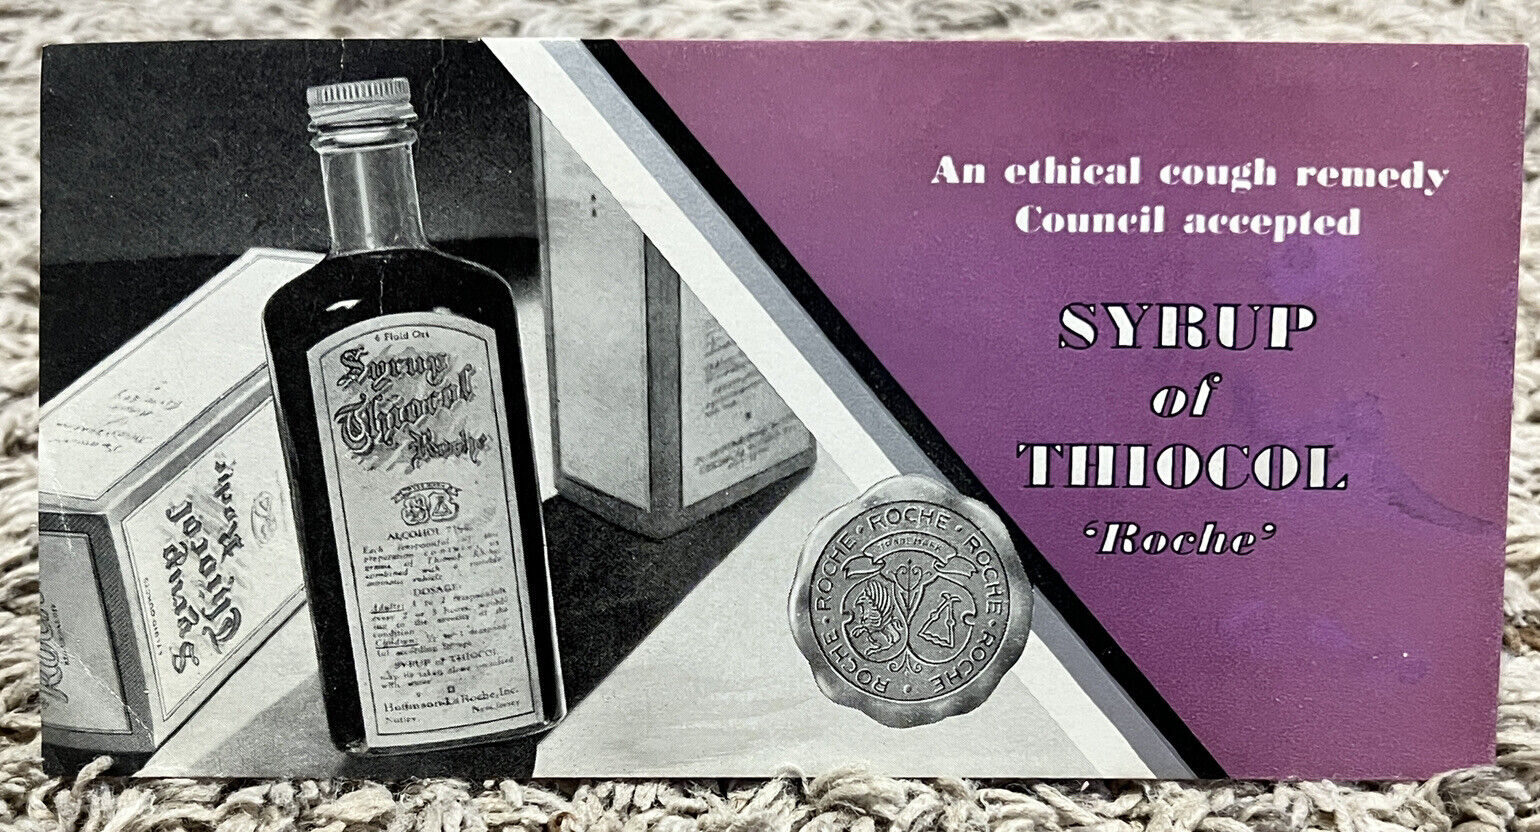 1920s-1930s ROCHE SYRUP OF THIOCOL ADVERTISEMENT ETHICAL COUTH REMEDY